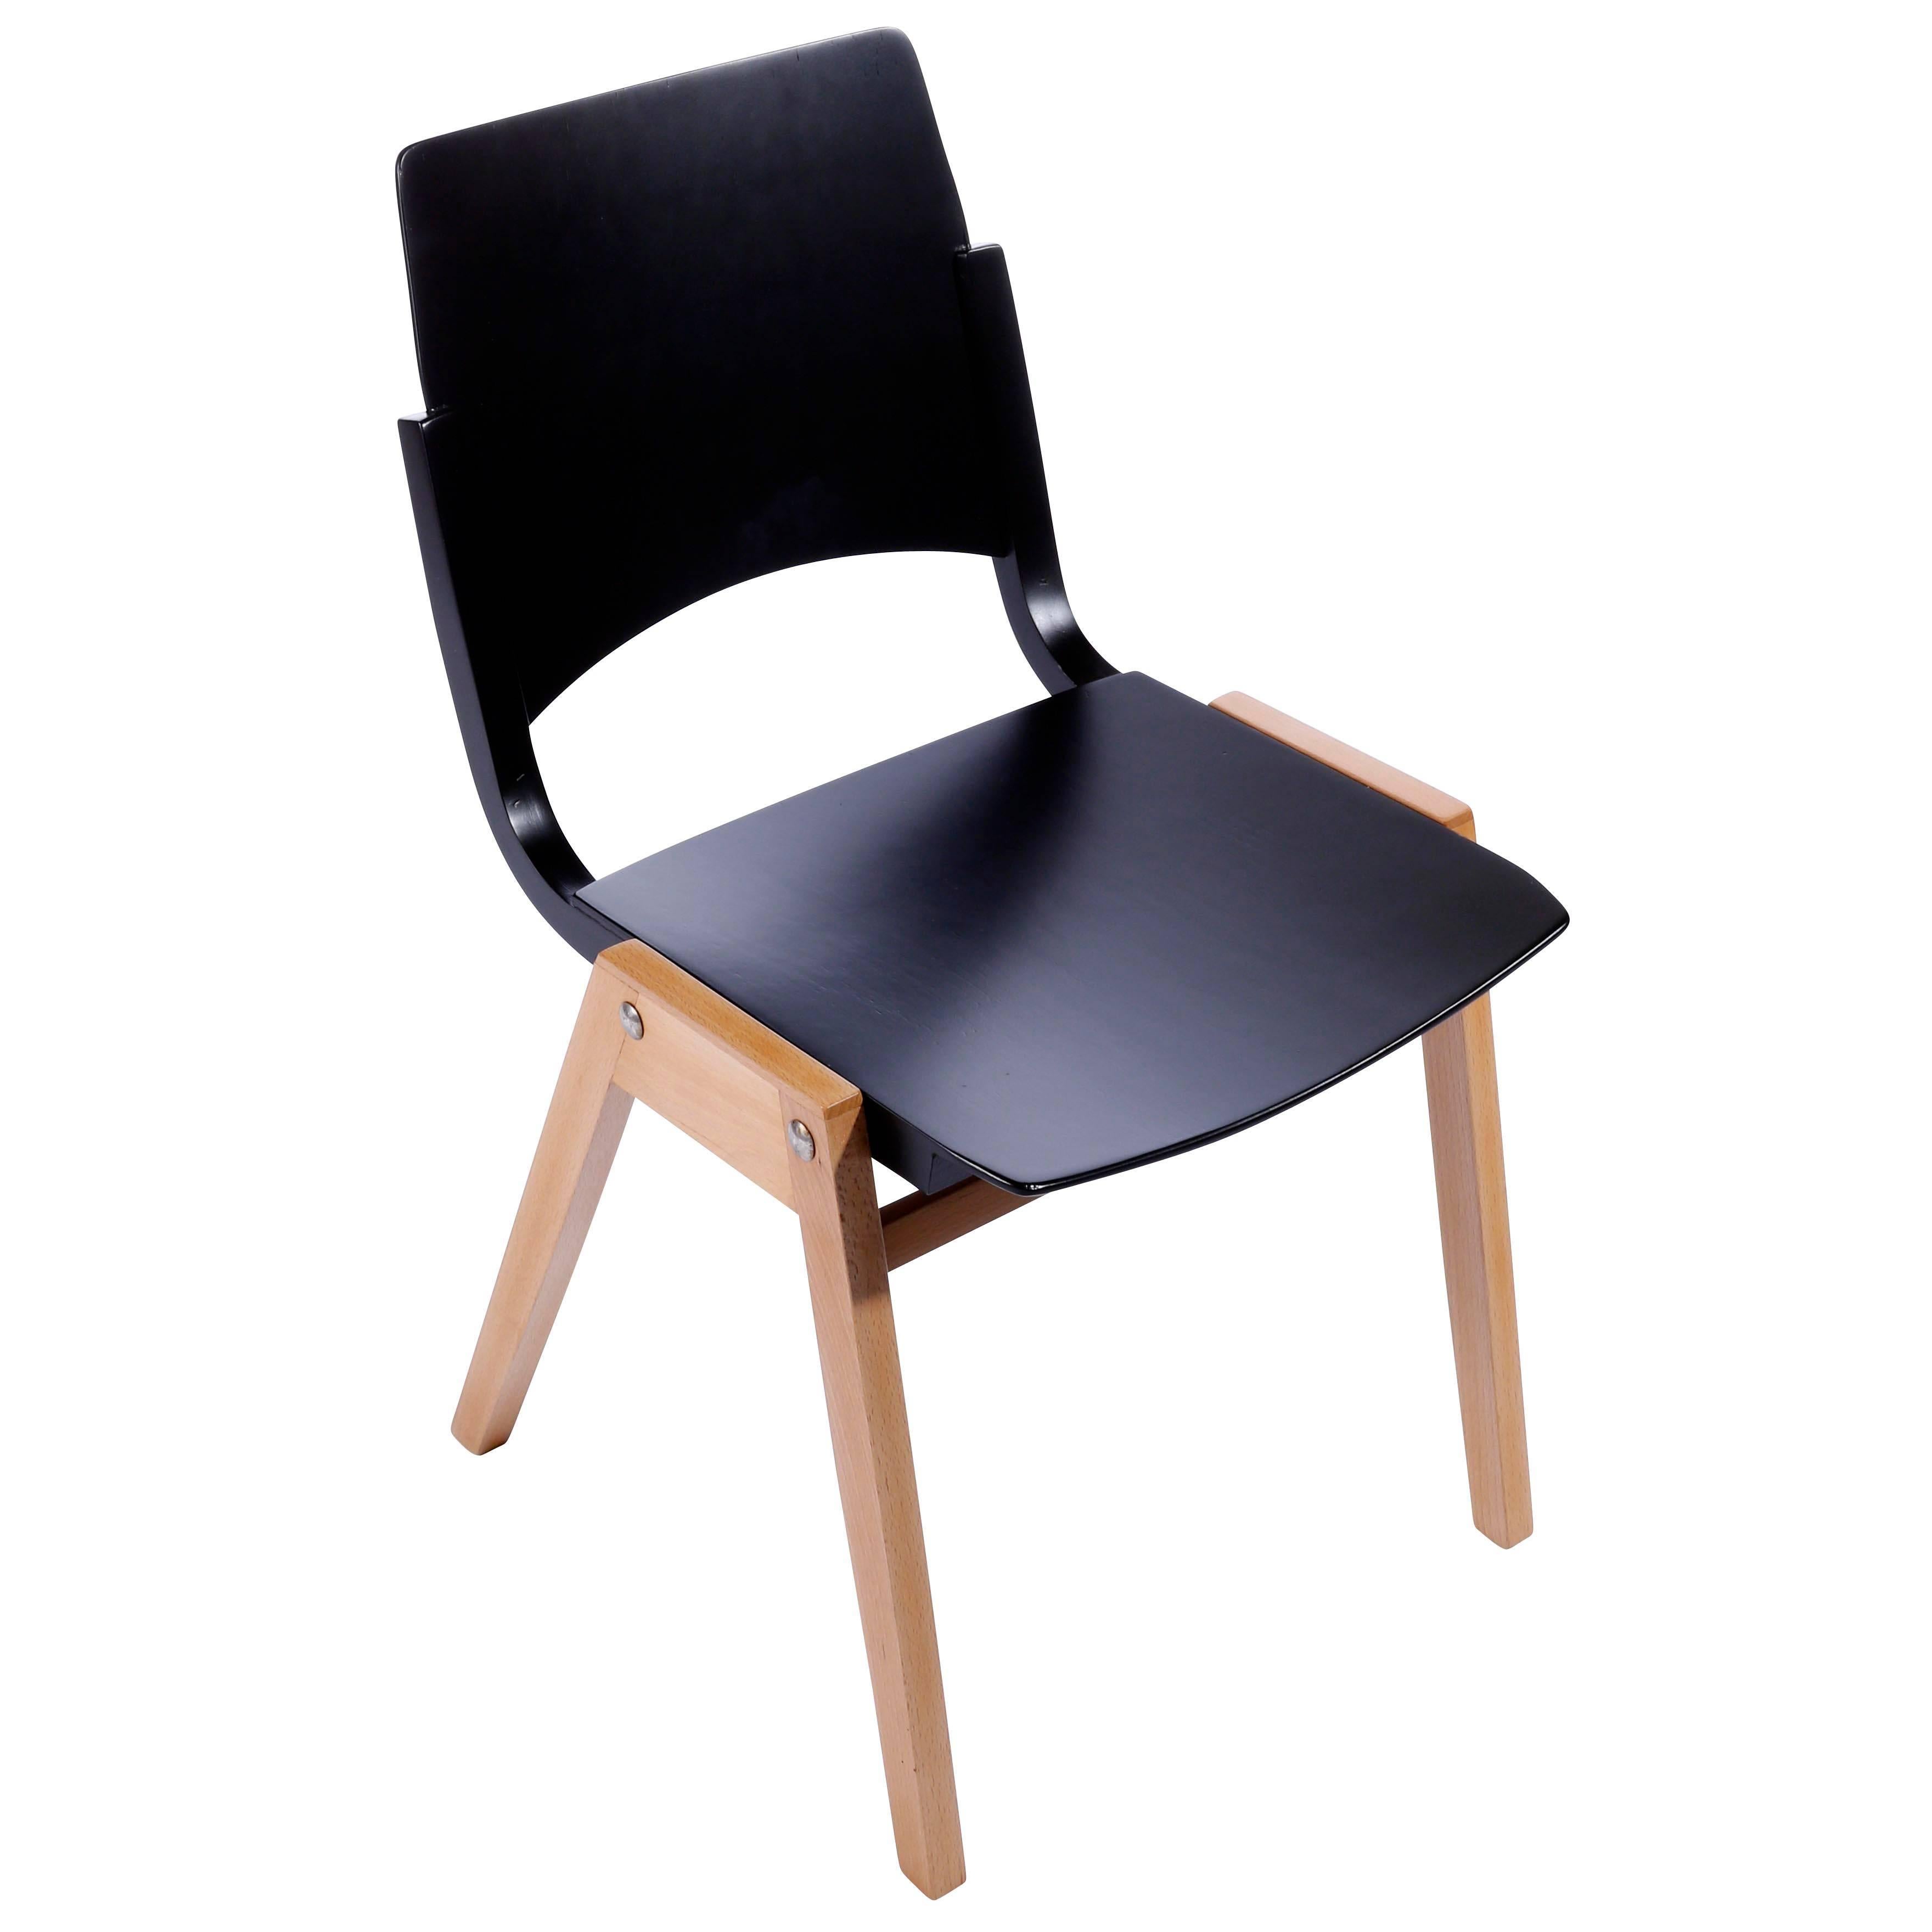 Painted Roland Rainer Stacking Chair P7, Bicolored Beech, Austria, 1952